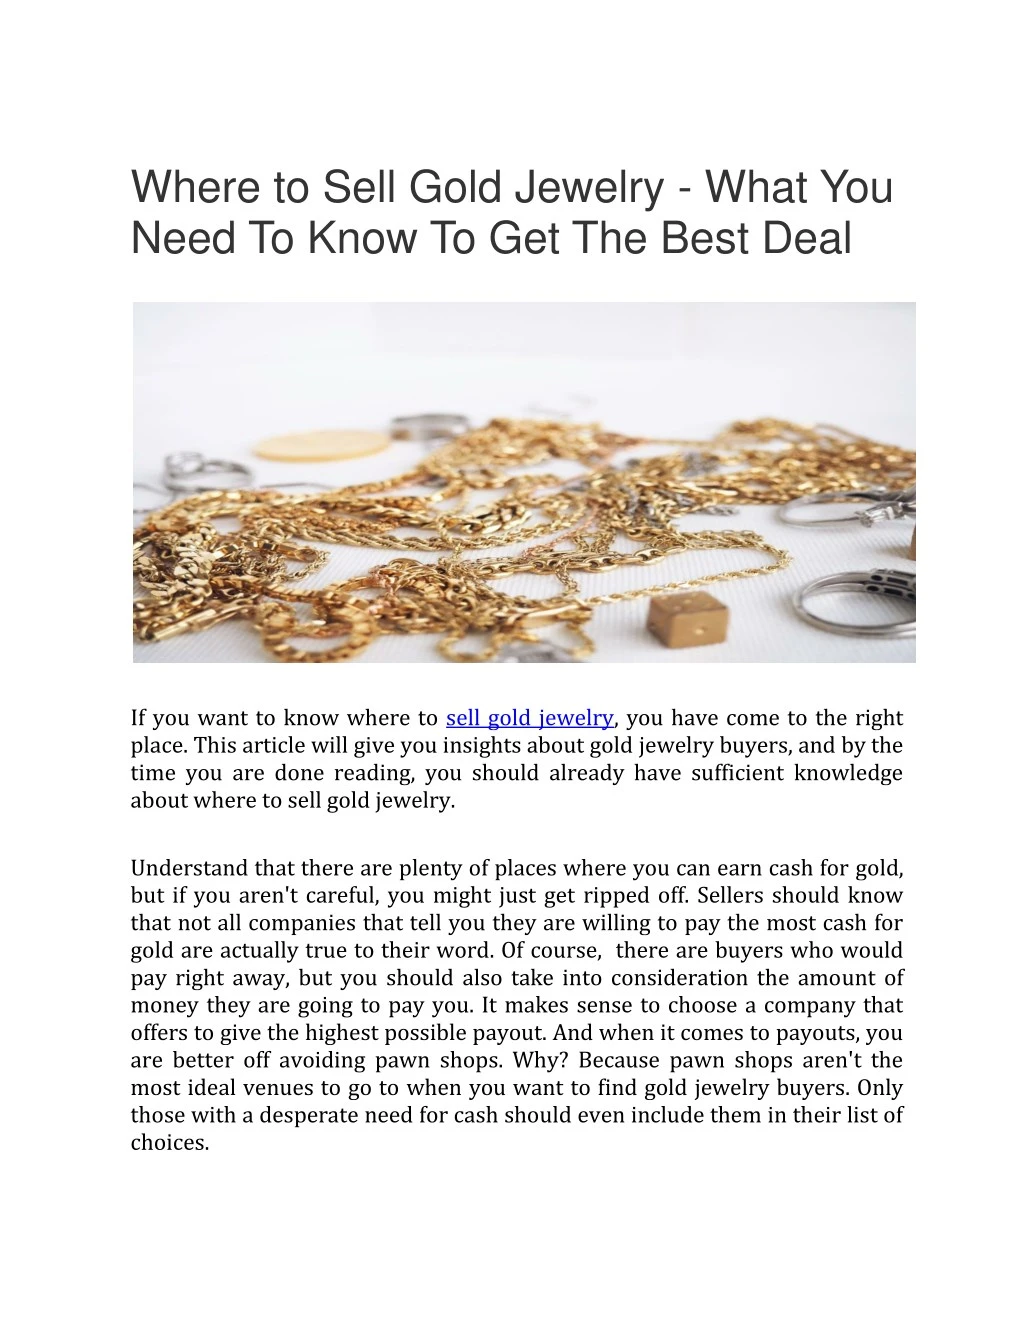 where to sell gold jewelry what you need to know